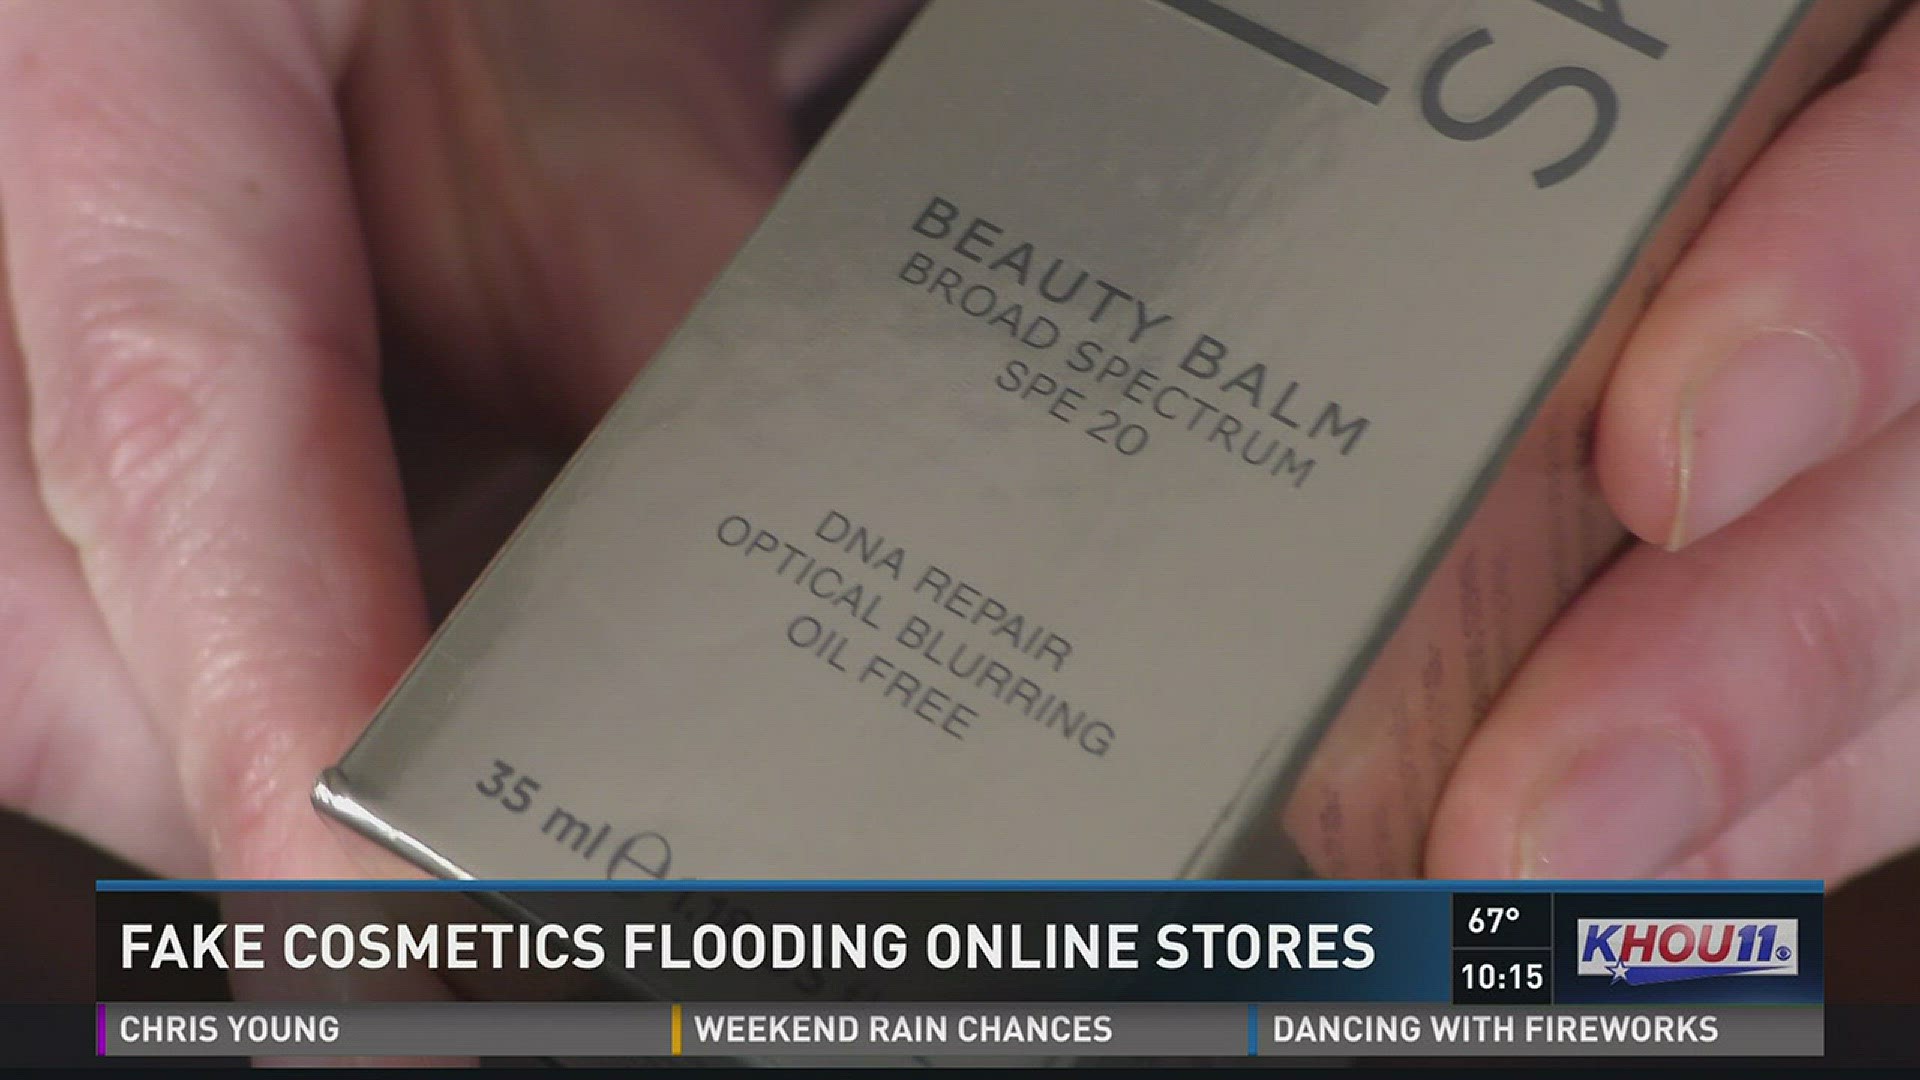 Move over, knockoff handbags! The latest trend in counterfeiting is cosmetics.